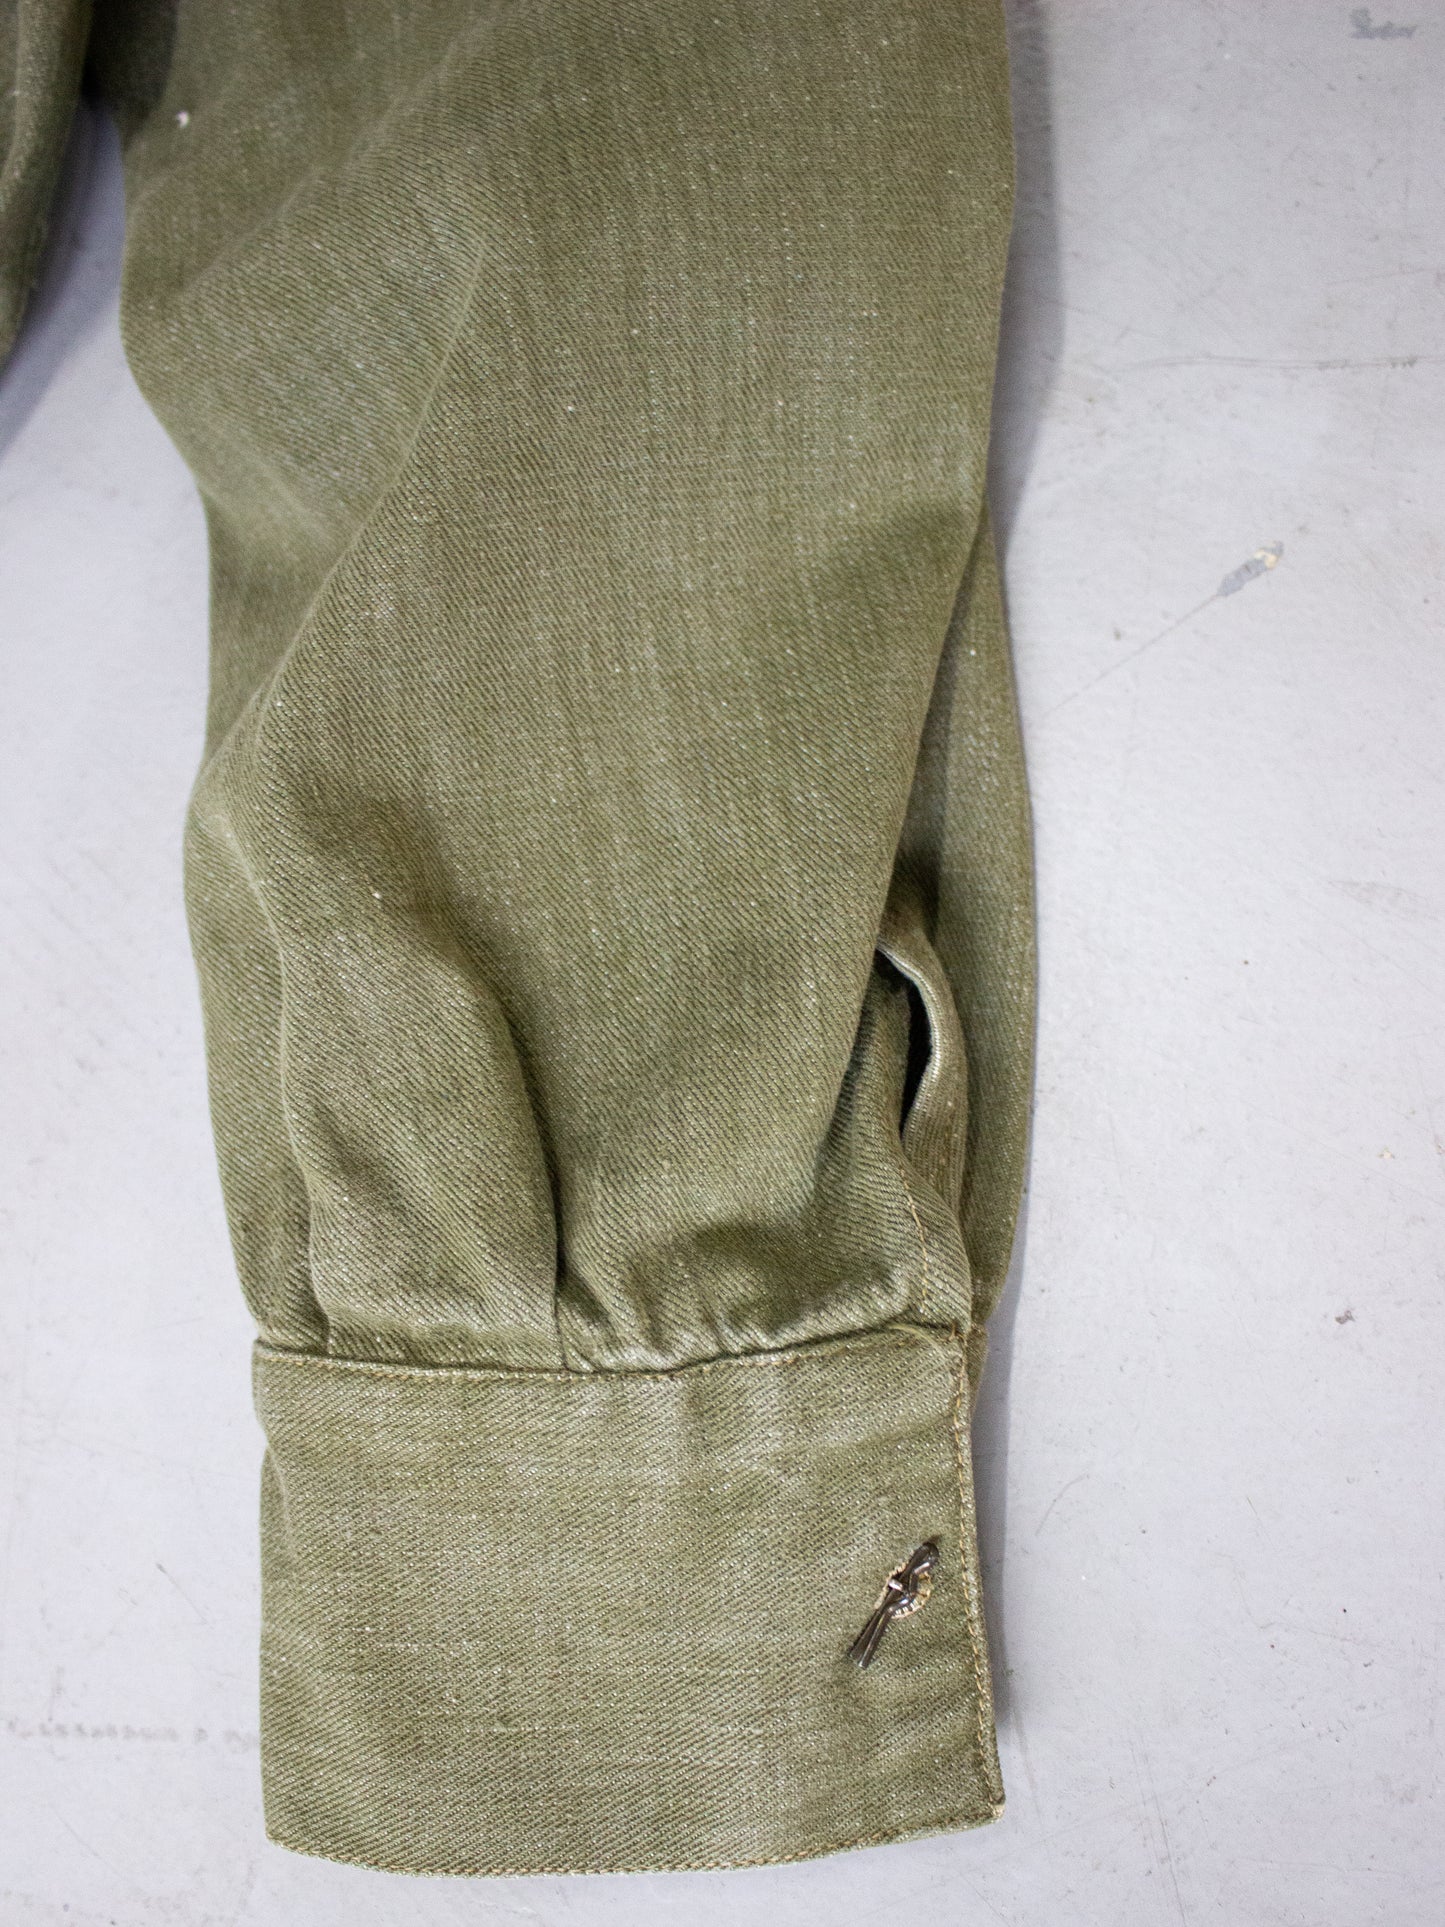 1950's British Military Royal Marines Overalls Blouse Jacket in Olive Green Cotton Label Dated 1952 (Size Medium - Large)